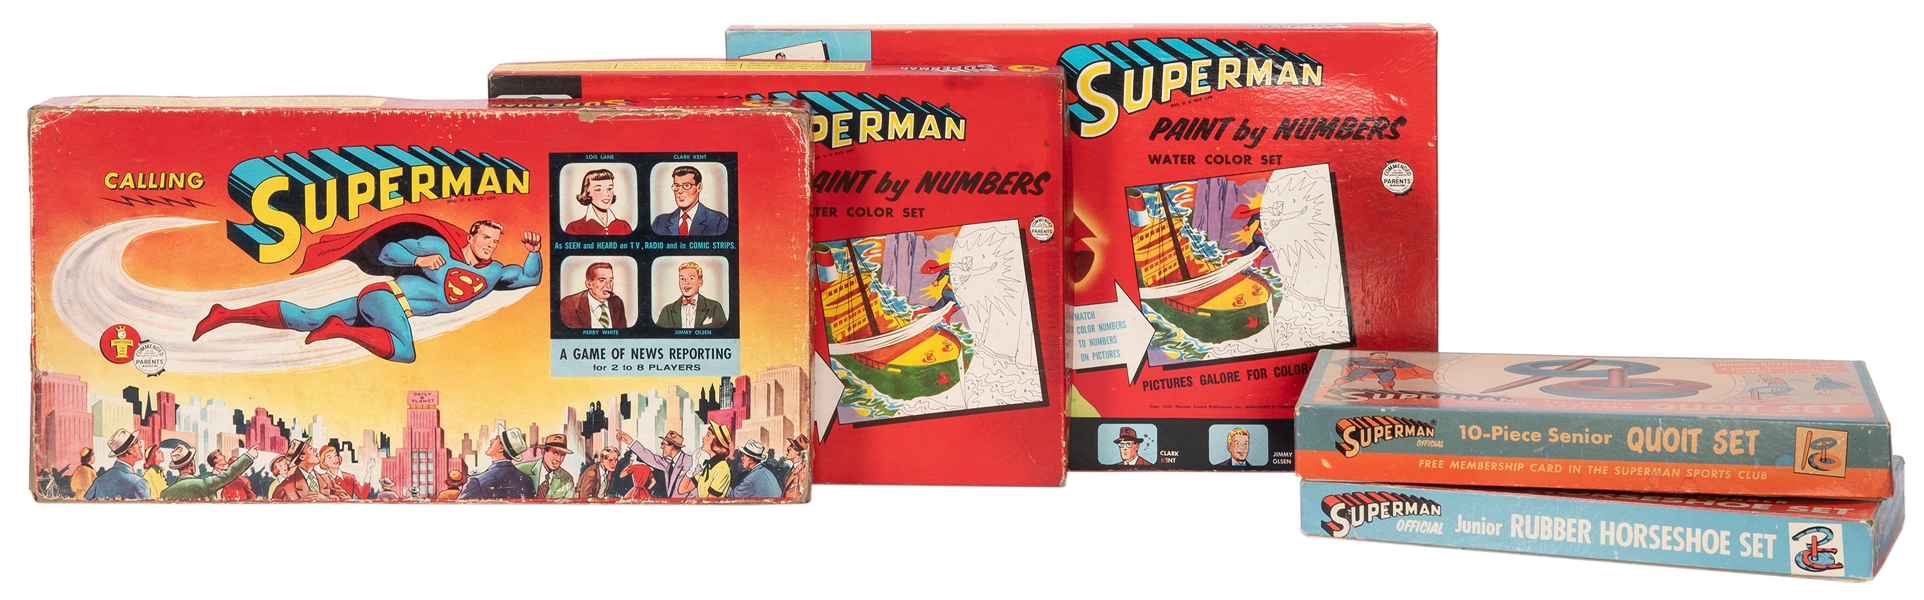  Superman Collection of Vintage Toys and Memorabilia. 1950s/...